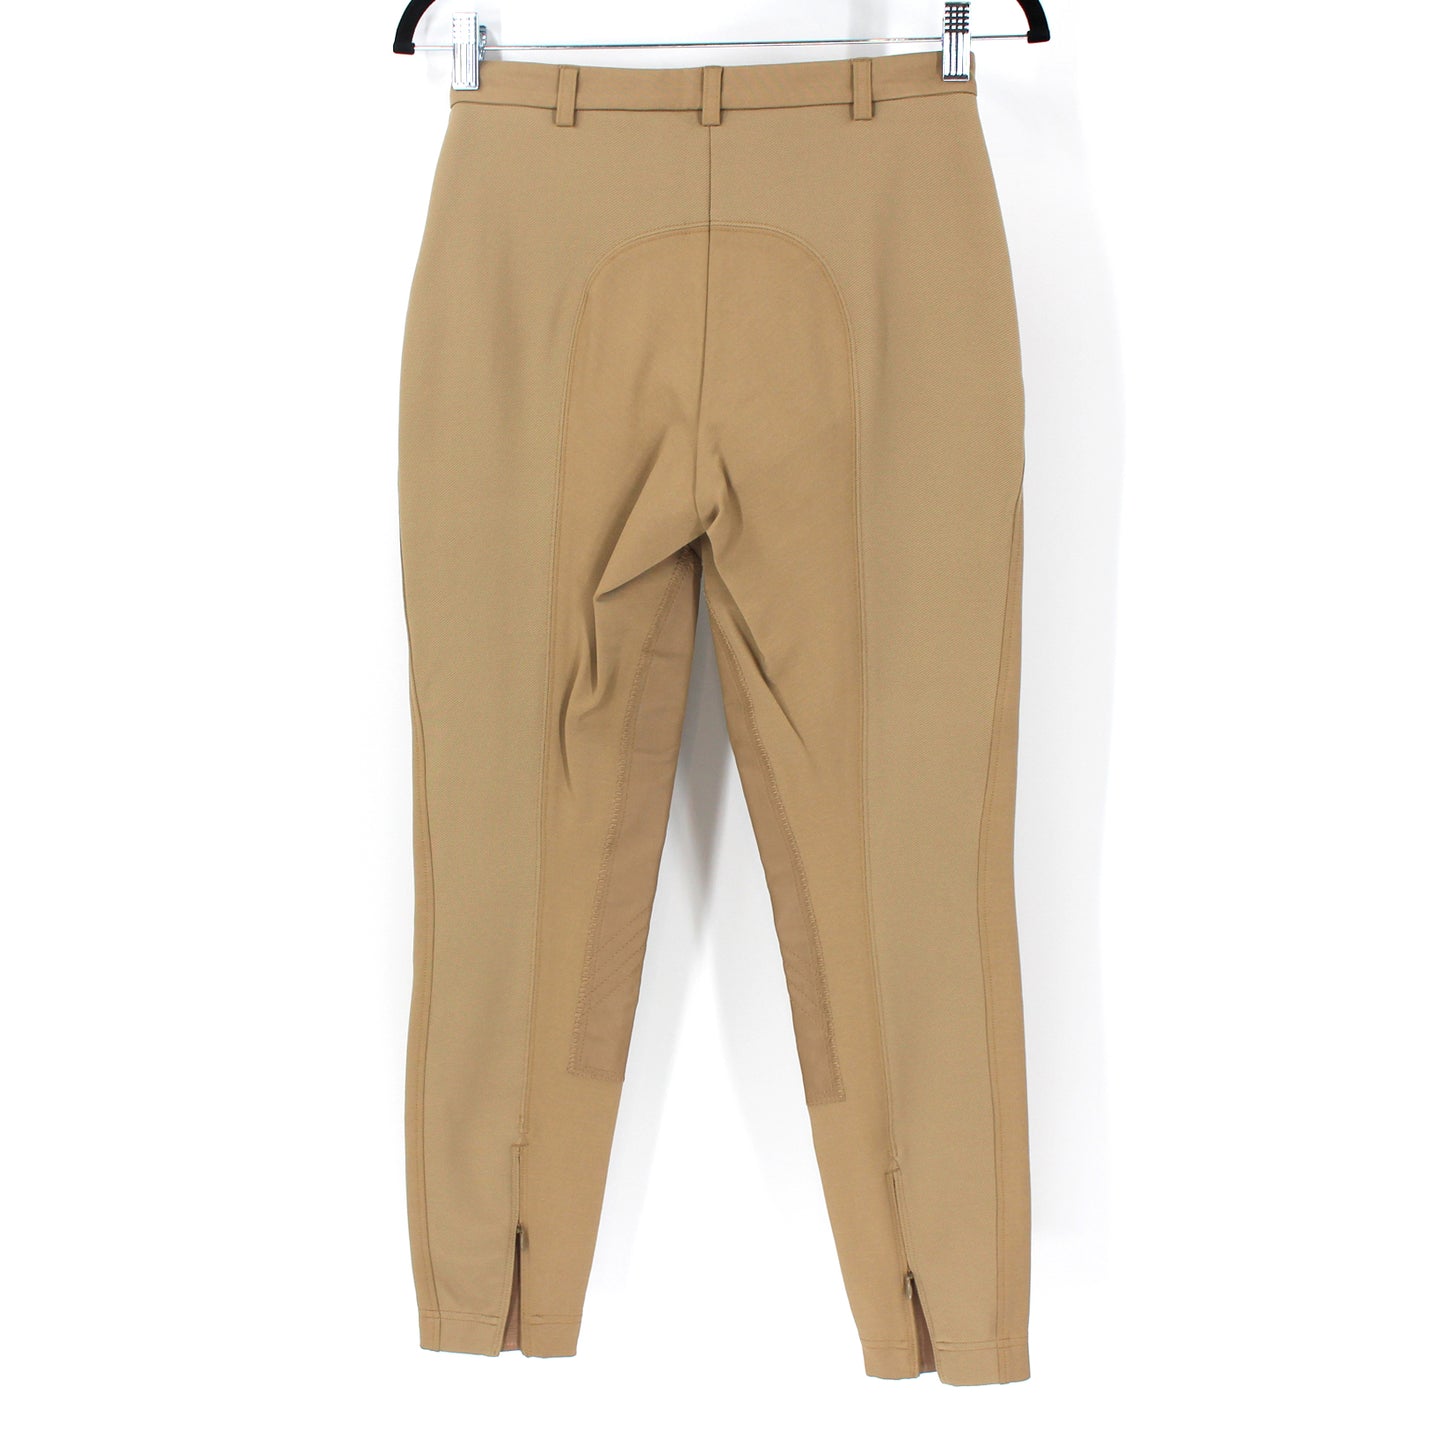 Burberry Equestrian Leather Pant